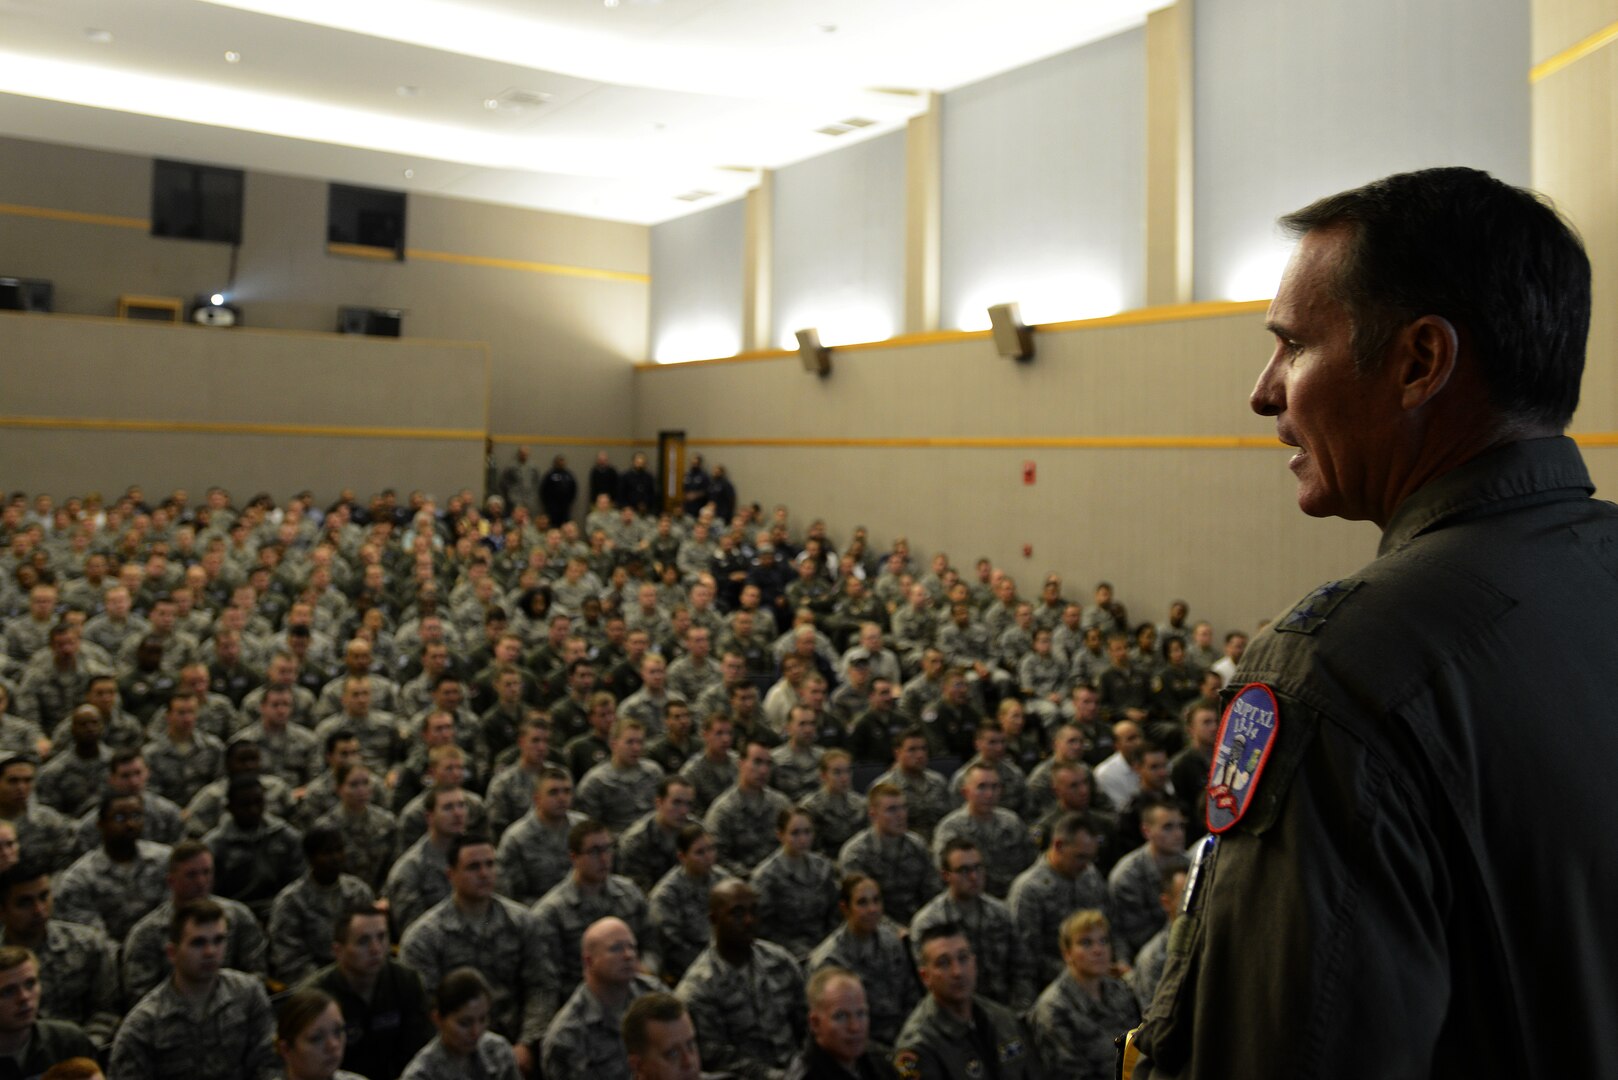 Maj. Gen. Michael A. Keltz, 19th Air Force commander, Joint Base San Antonio–Randolph, Texas, addresses members of Team XL in Anderson Hall on Laughlin Air Force Base, Texas, Jan. 7, 2015. Keltz passionately expressed the importance for leaders to “give purpose, direction and motivation to prepare Airmen for combat”. He stressed continued innovation into the future as we search for the “wild mavericks” who help make positive changes in today’s Air Force. (U.S. Air Force photo by Staff Sgt. Steven R. Doty)(Released)